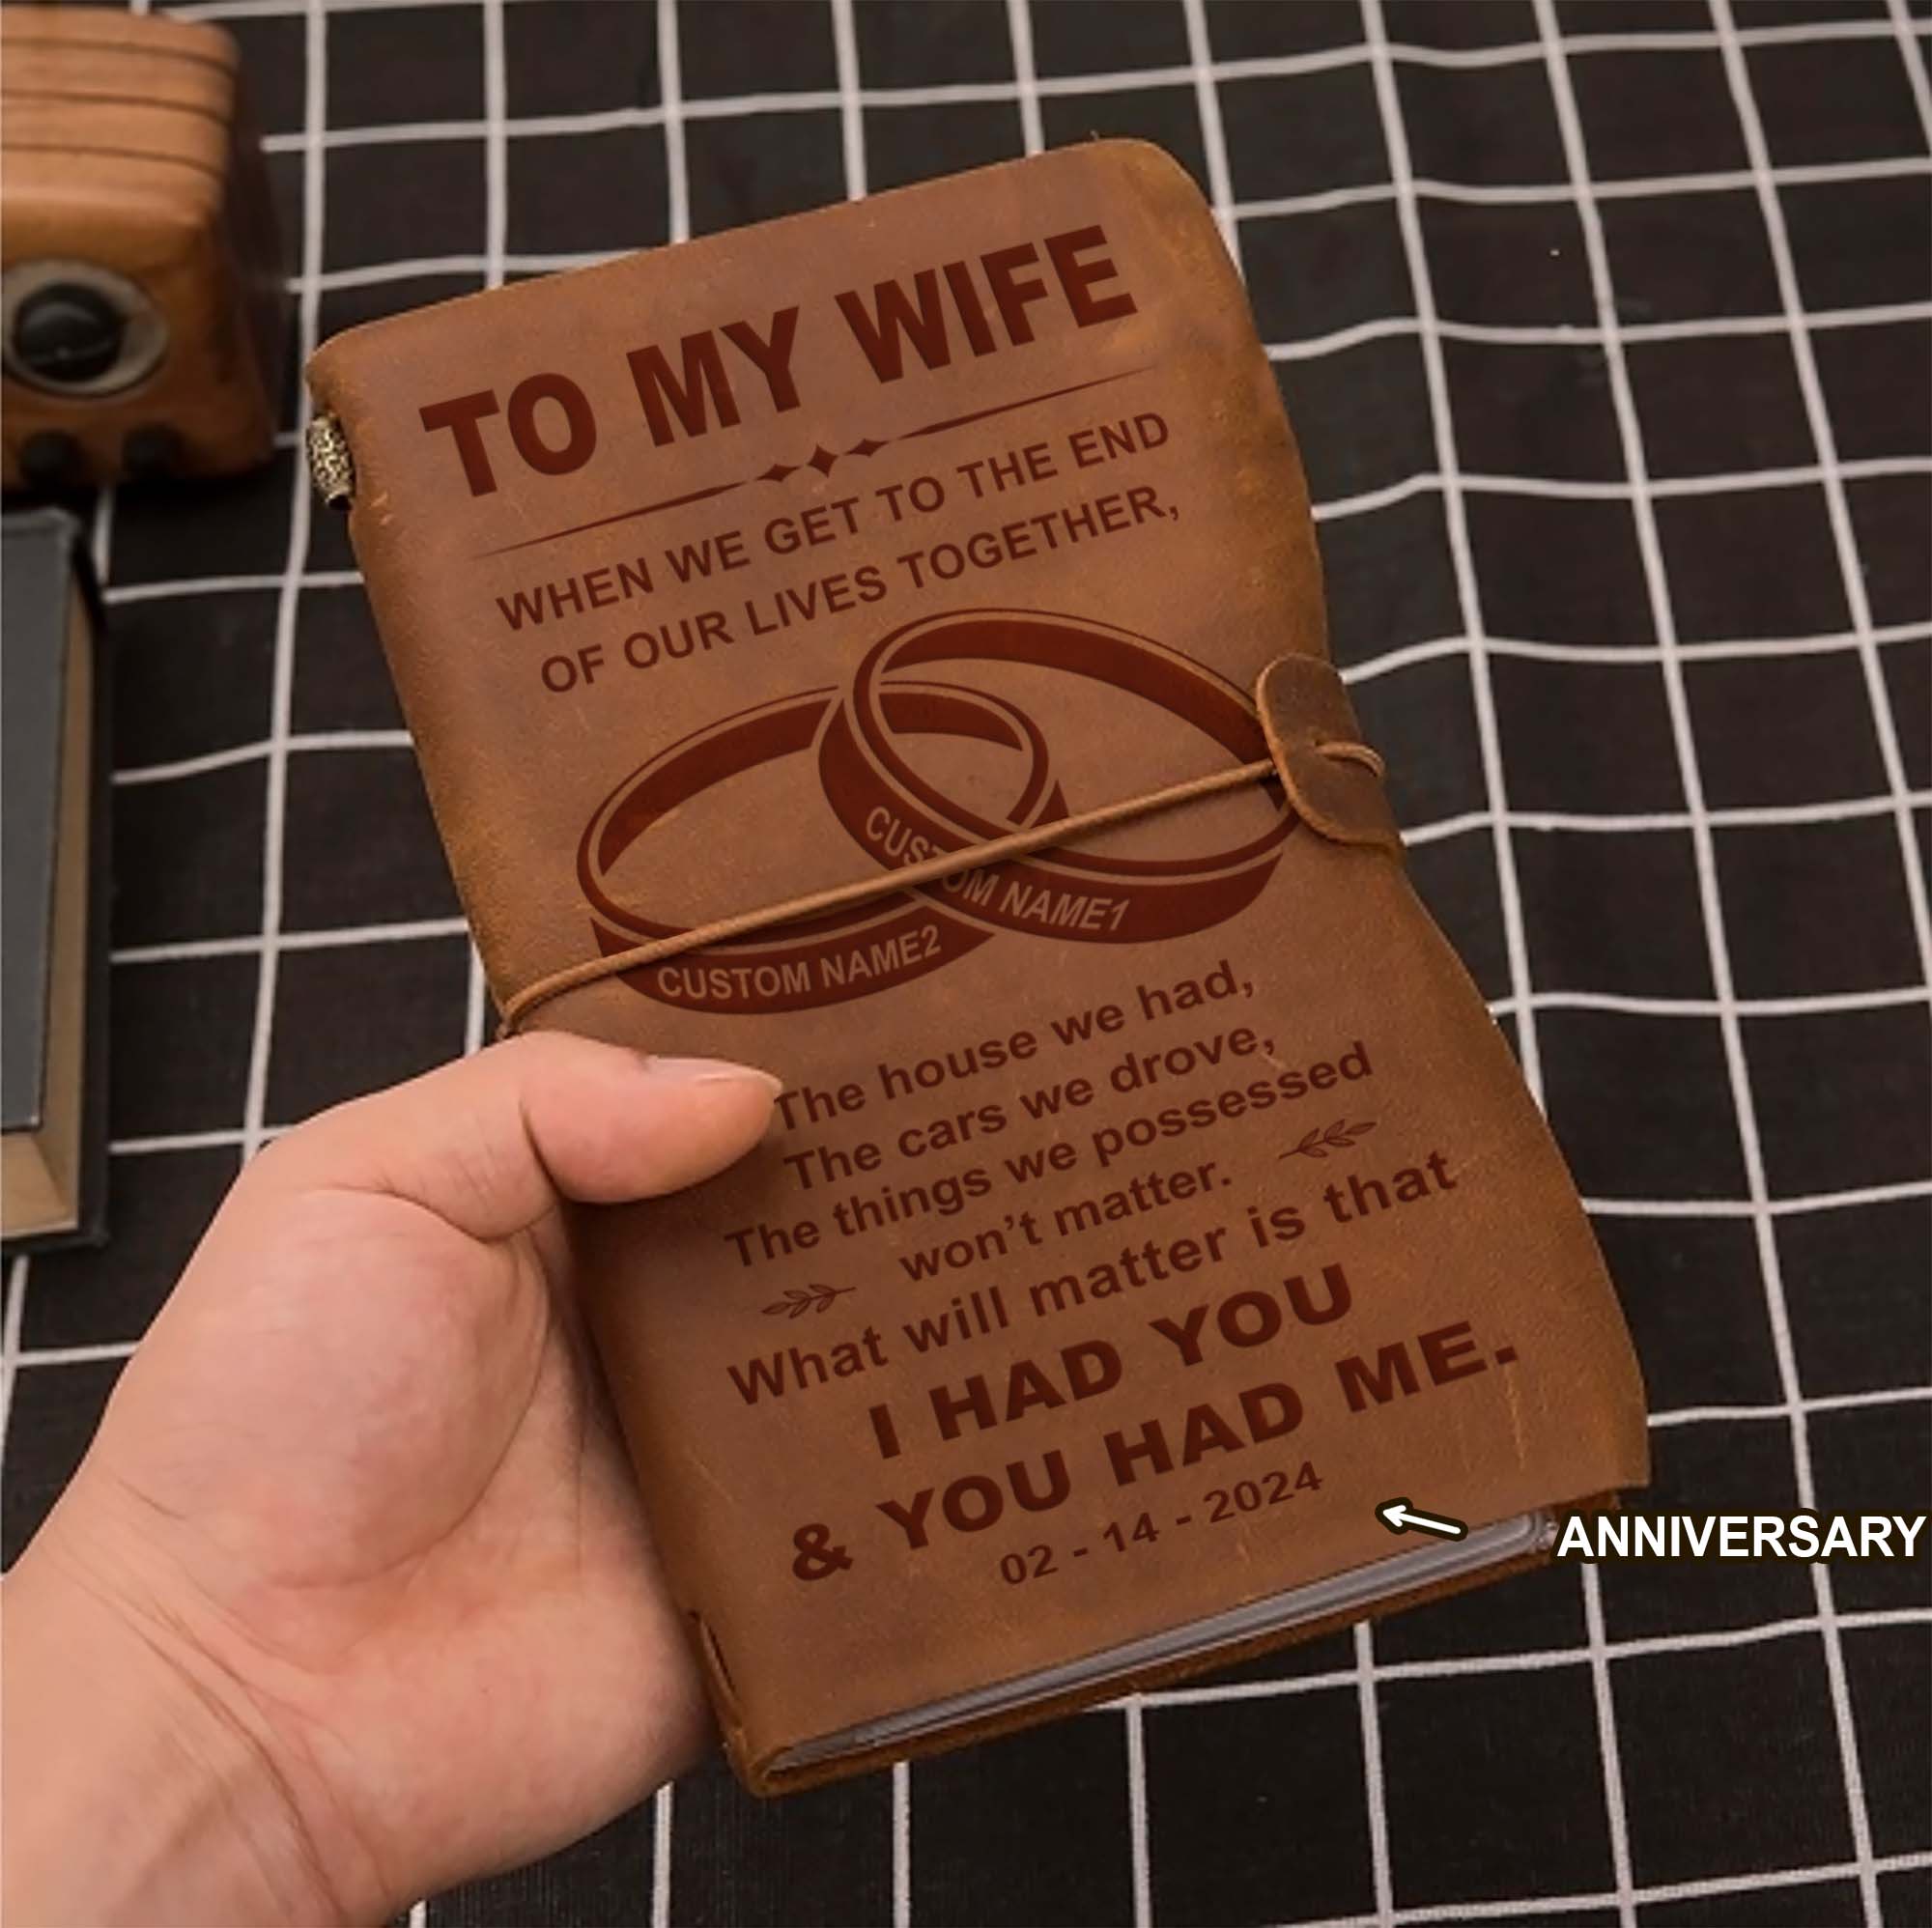 Perfect for anniversaries, birthdays, or just because-Vintage Journal Husband to wife- When we get to the end of our lives together